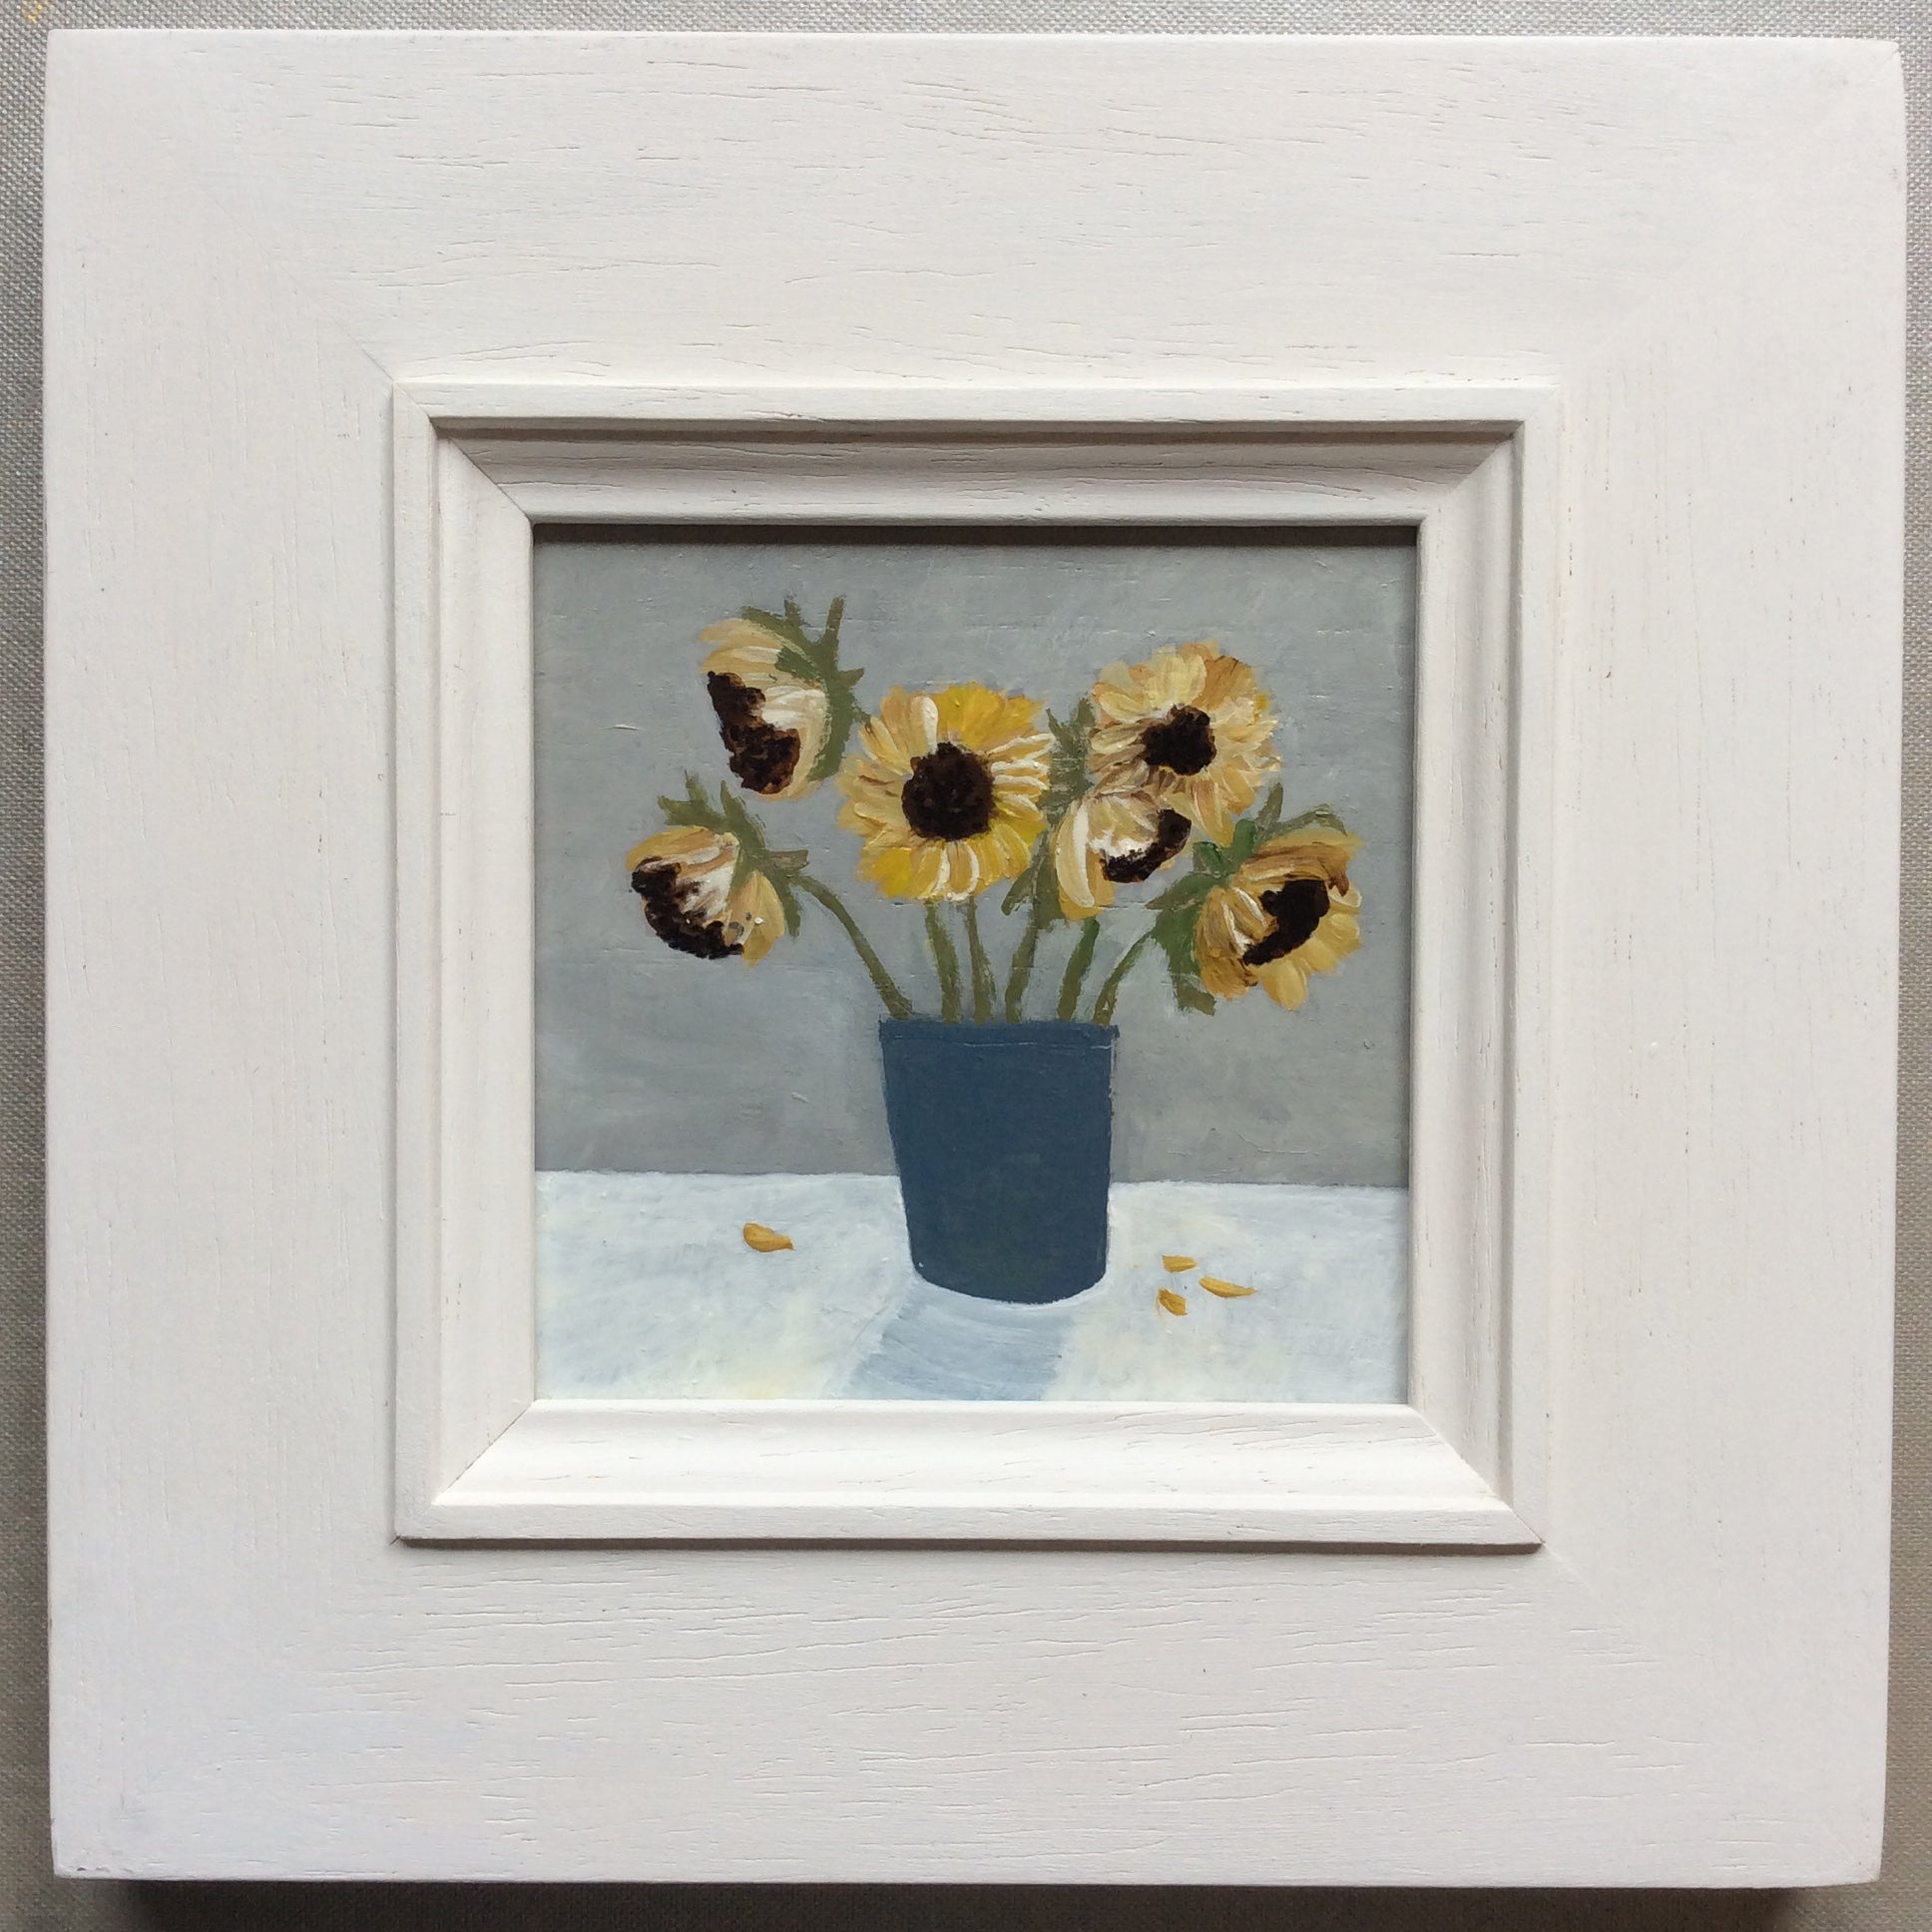 Mixed Media art on wood By Louise O’Hara  “Sunflowers”